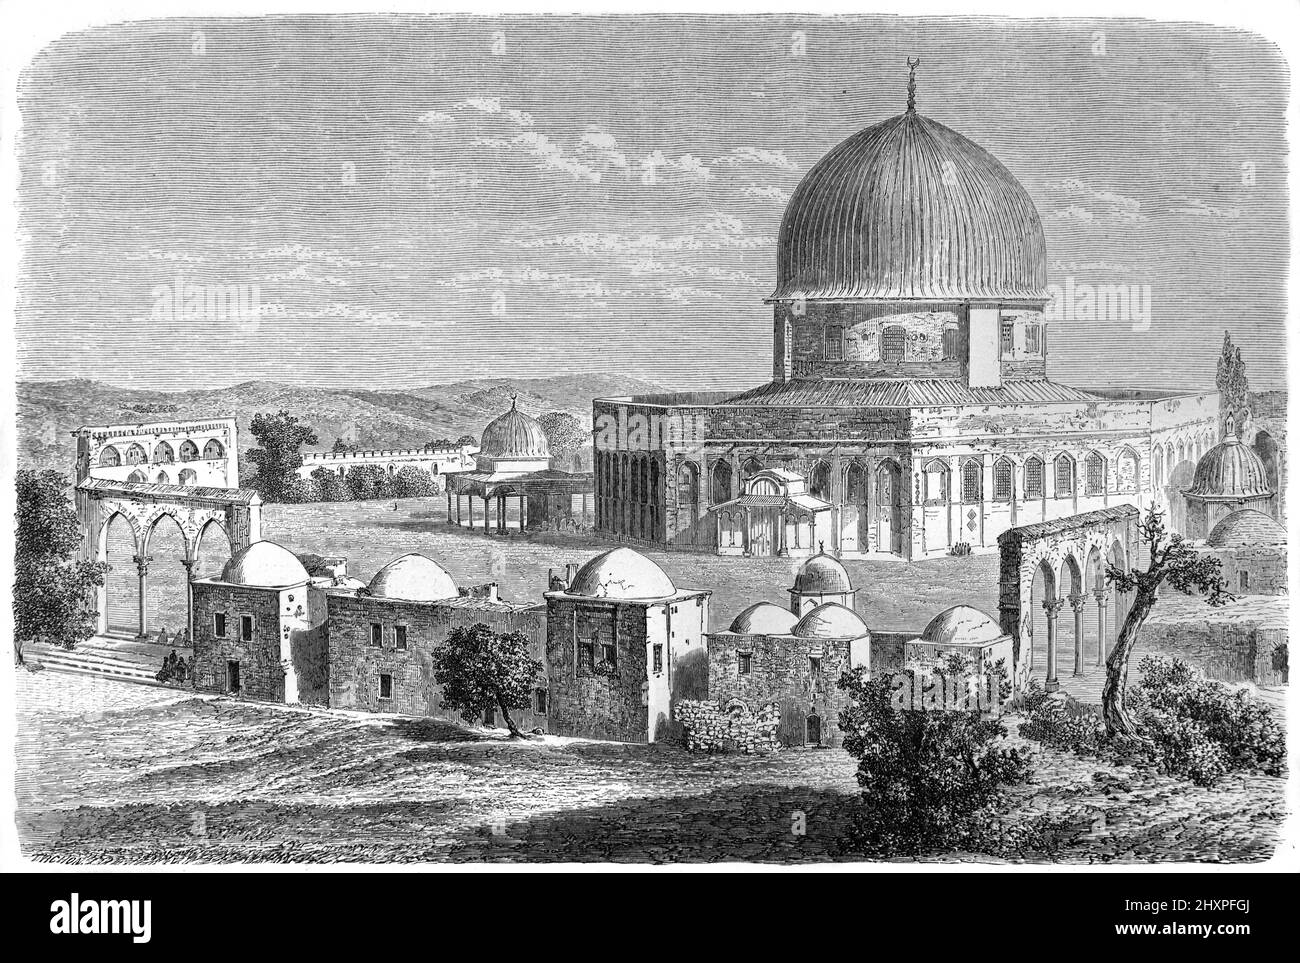 Dome of the Rock on Temple Mount in the Old City Jerusalem. Vintage Illustration or Engraving 1860. Stock Photo